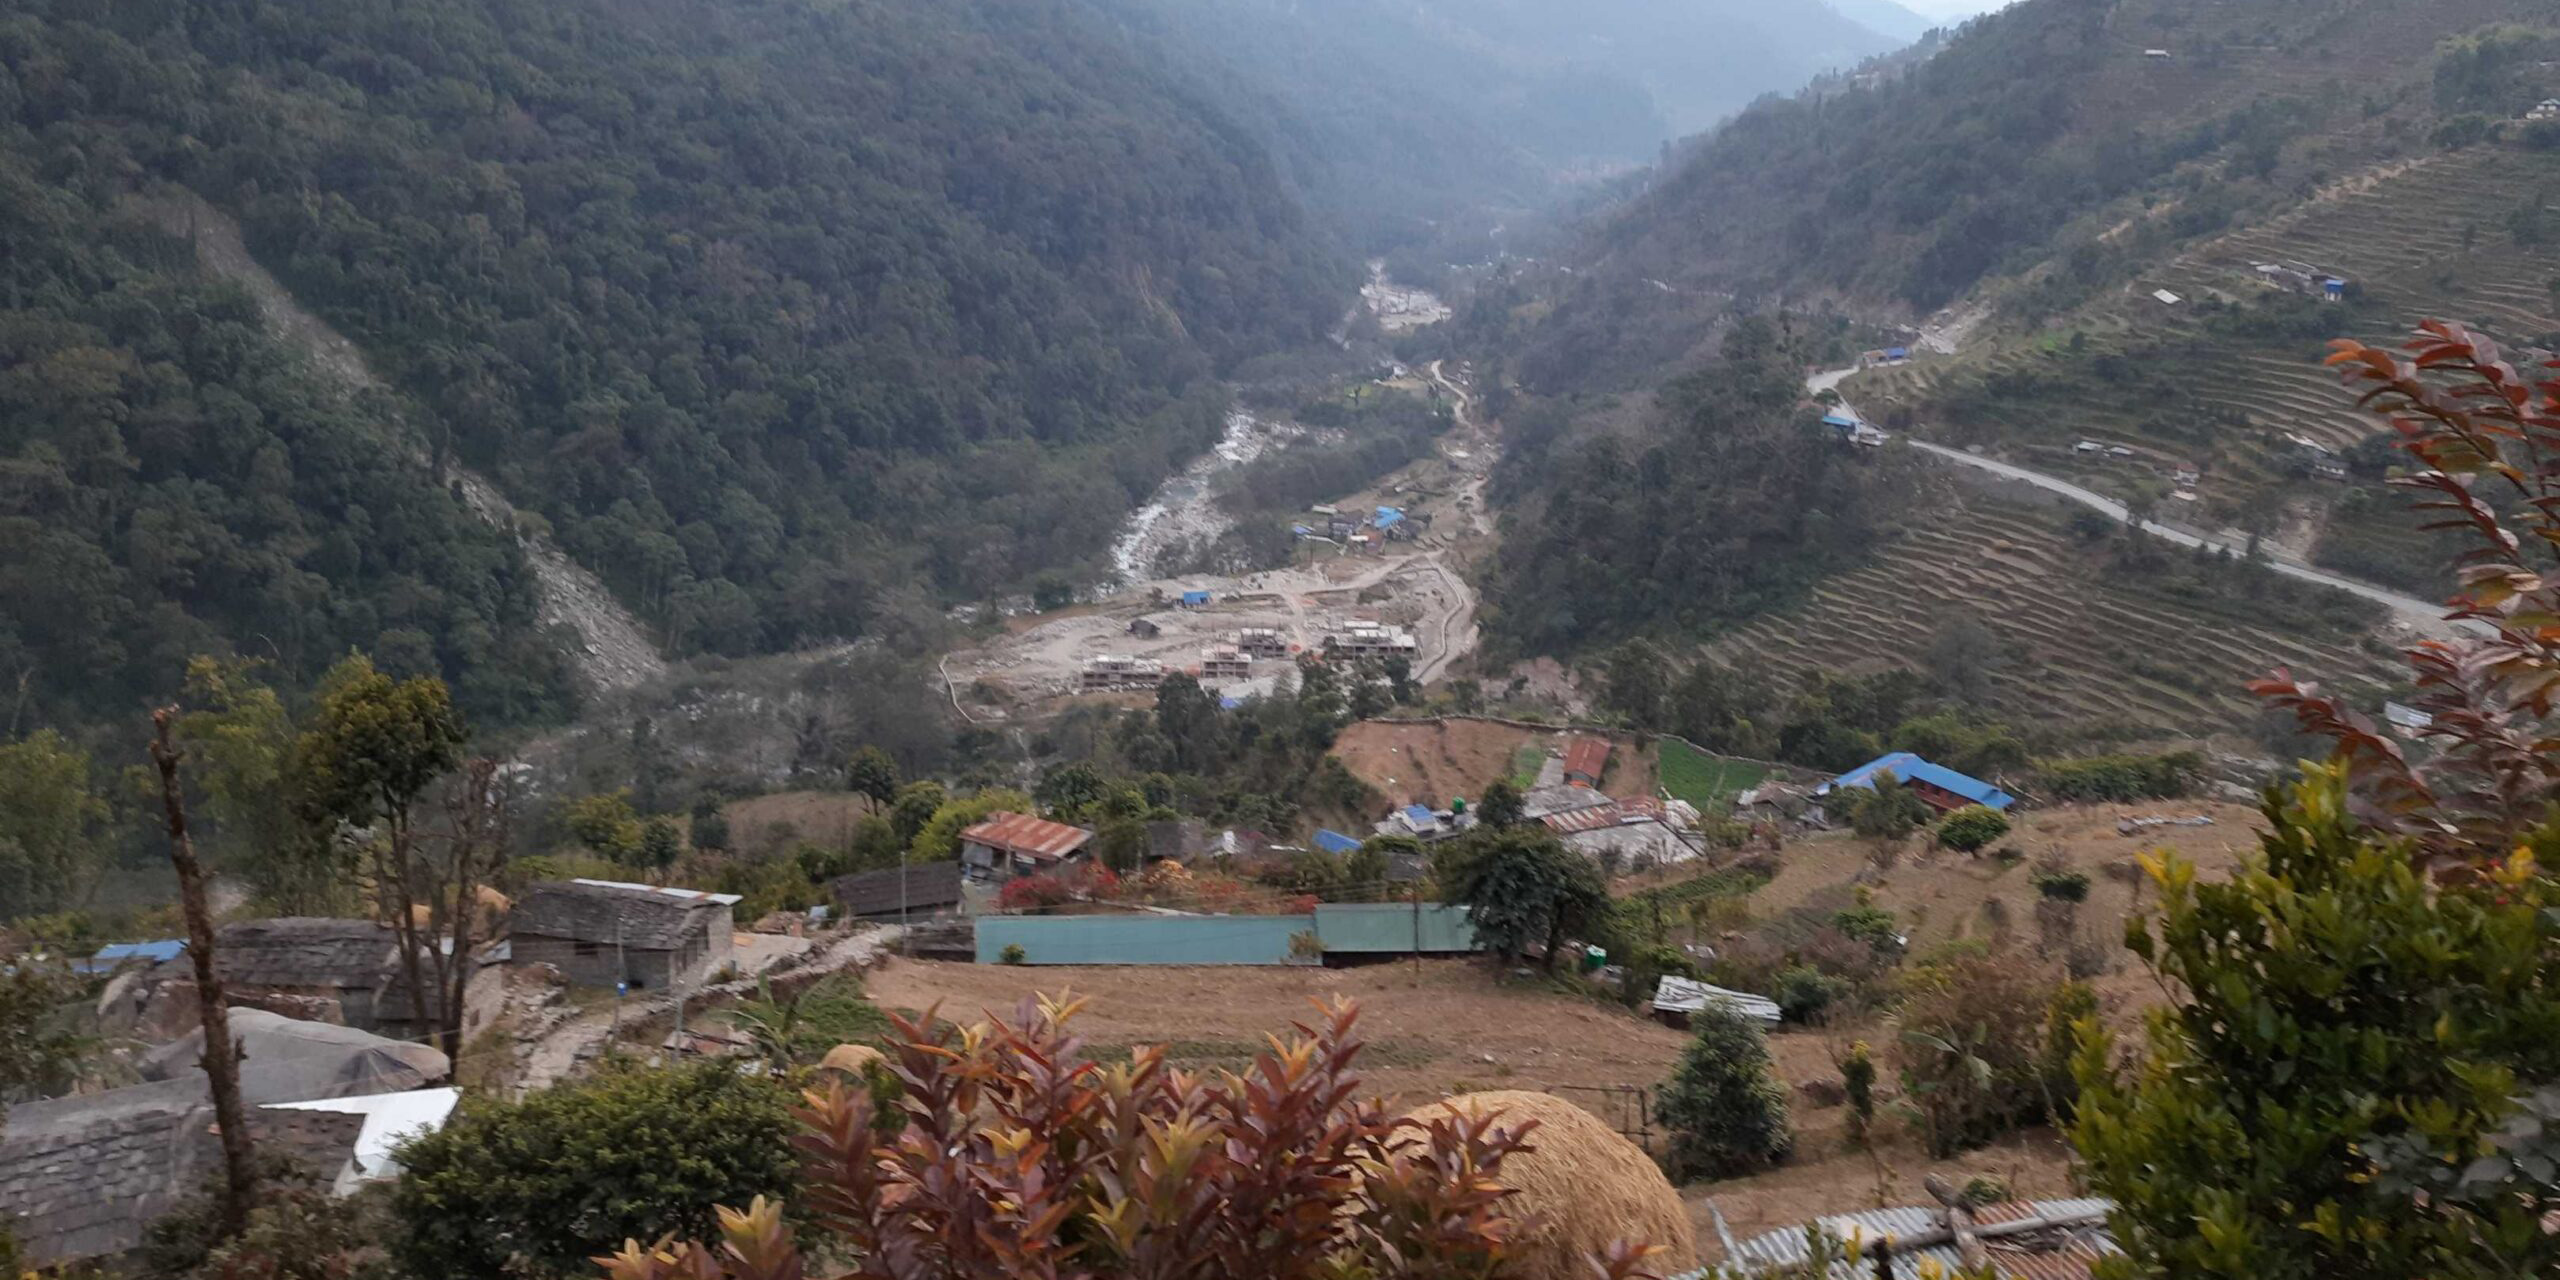 Nepal’s hydropower boom comes at the cost of its fish